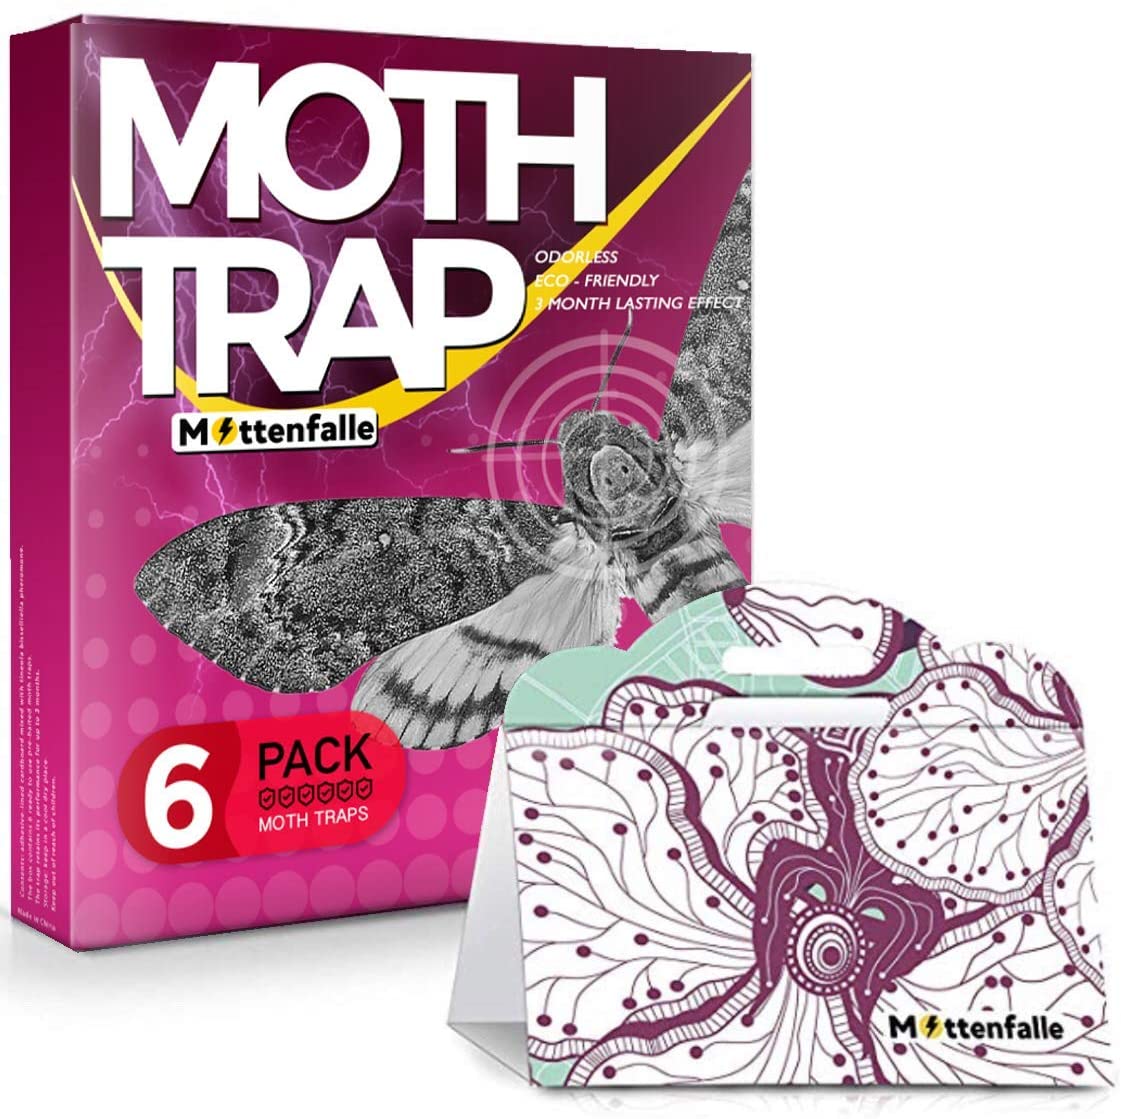 Mottenfalle Clothes Moth Traps 6-Pack - Prime Safe Non-Toxic Eco-Friendly Moth Traps with Pheromones Sticky Adhesive Tool for Wool Closet Carpet - wit